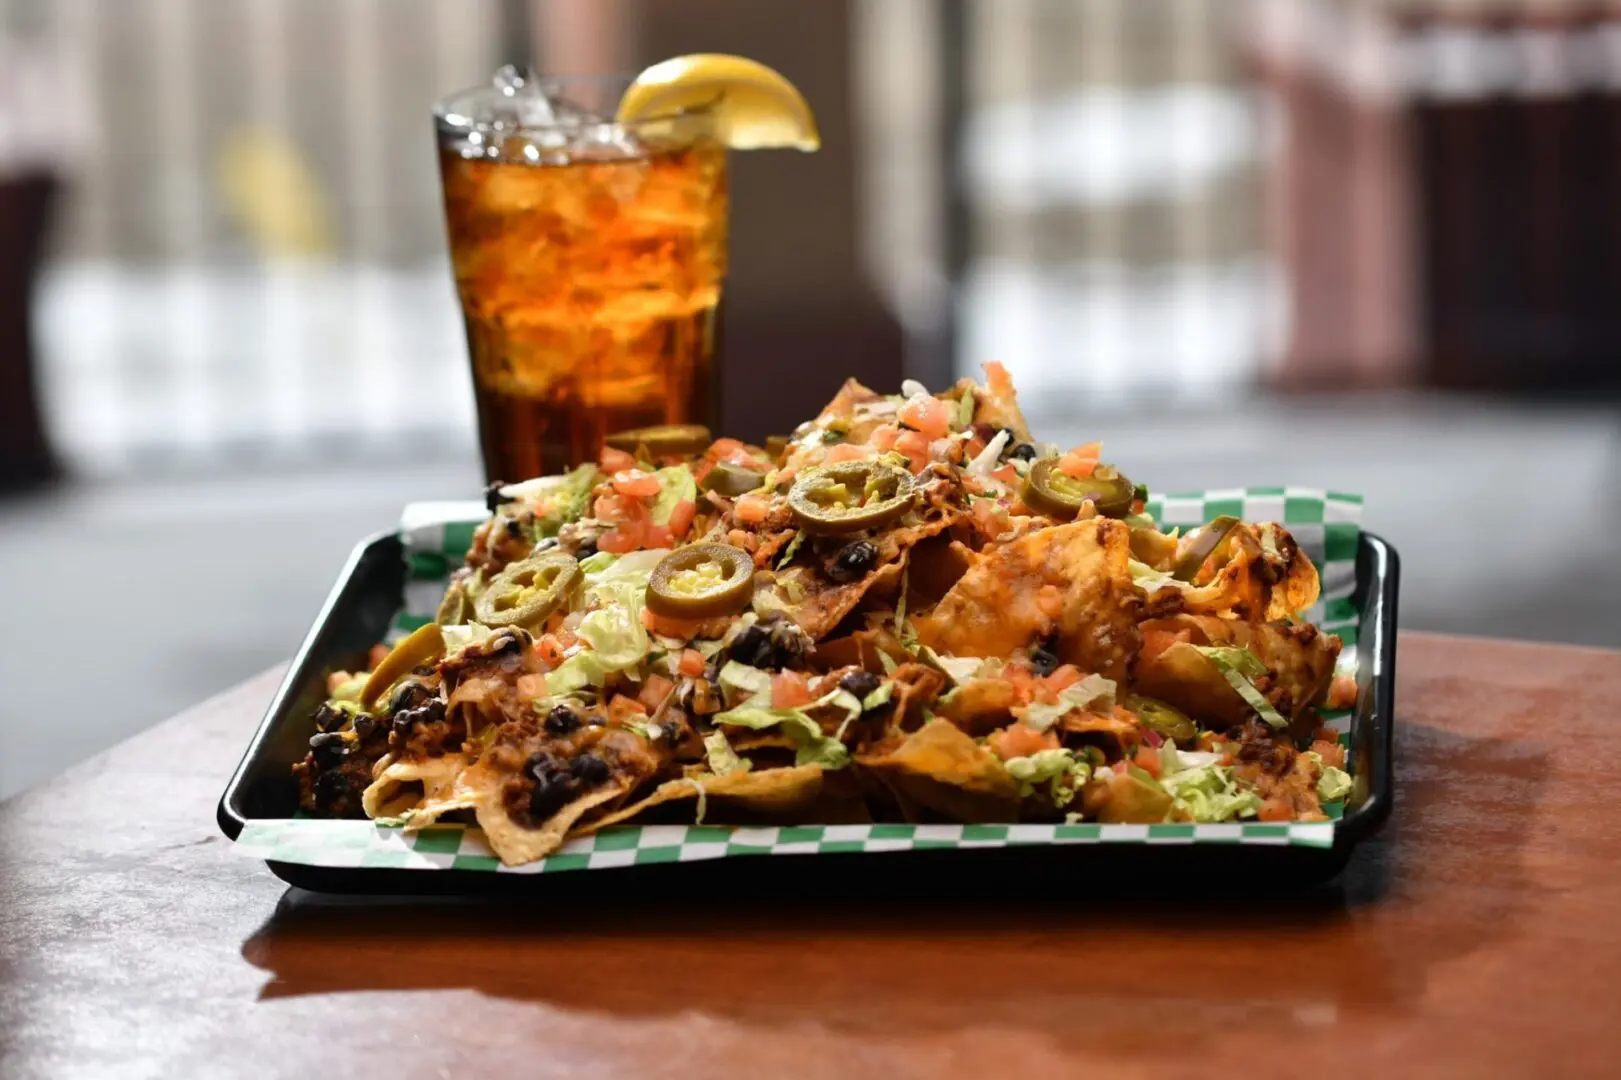 A tray of nachos and a drink on the table.